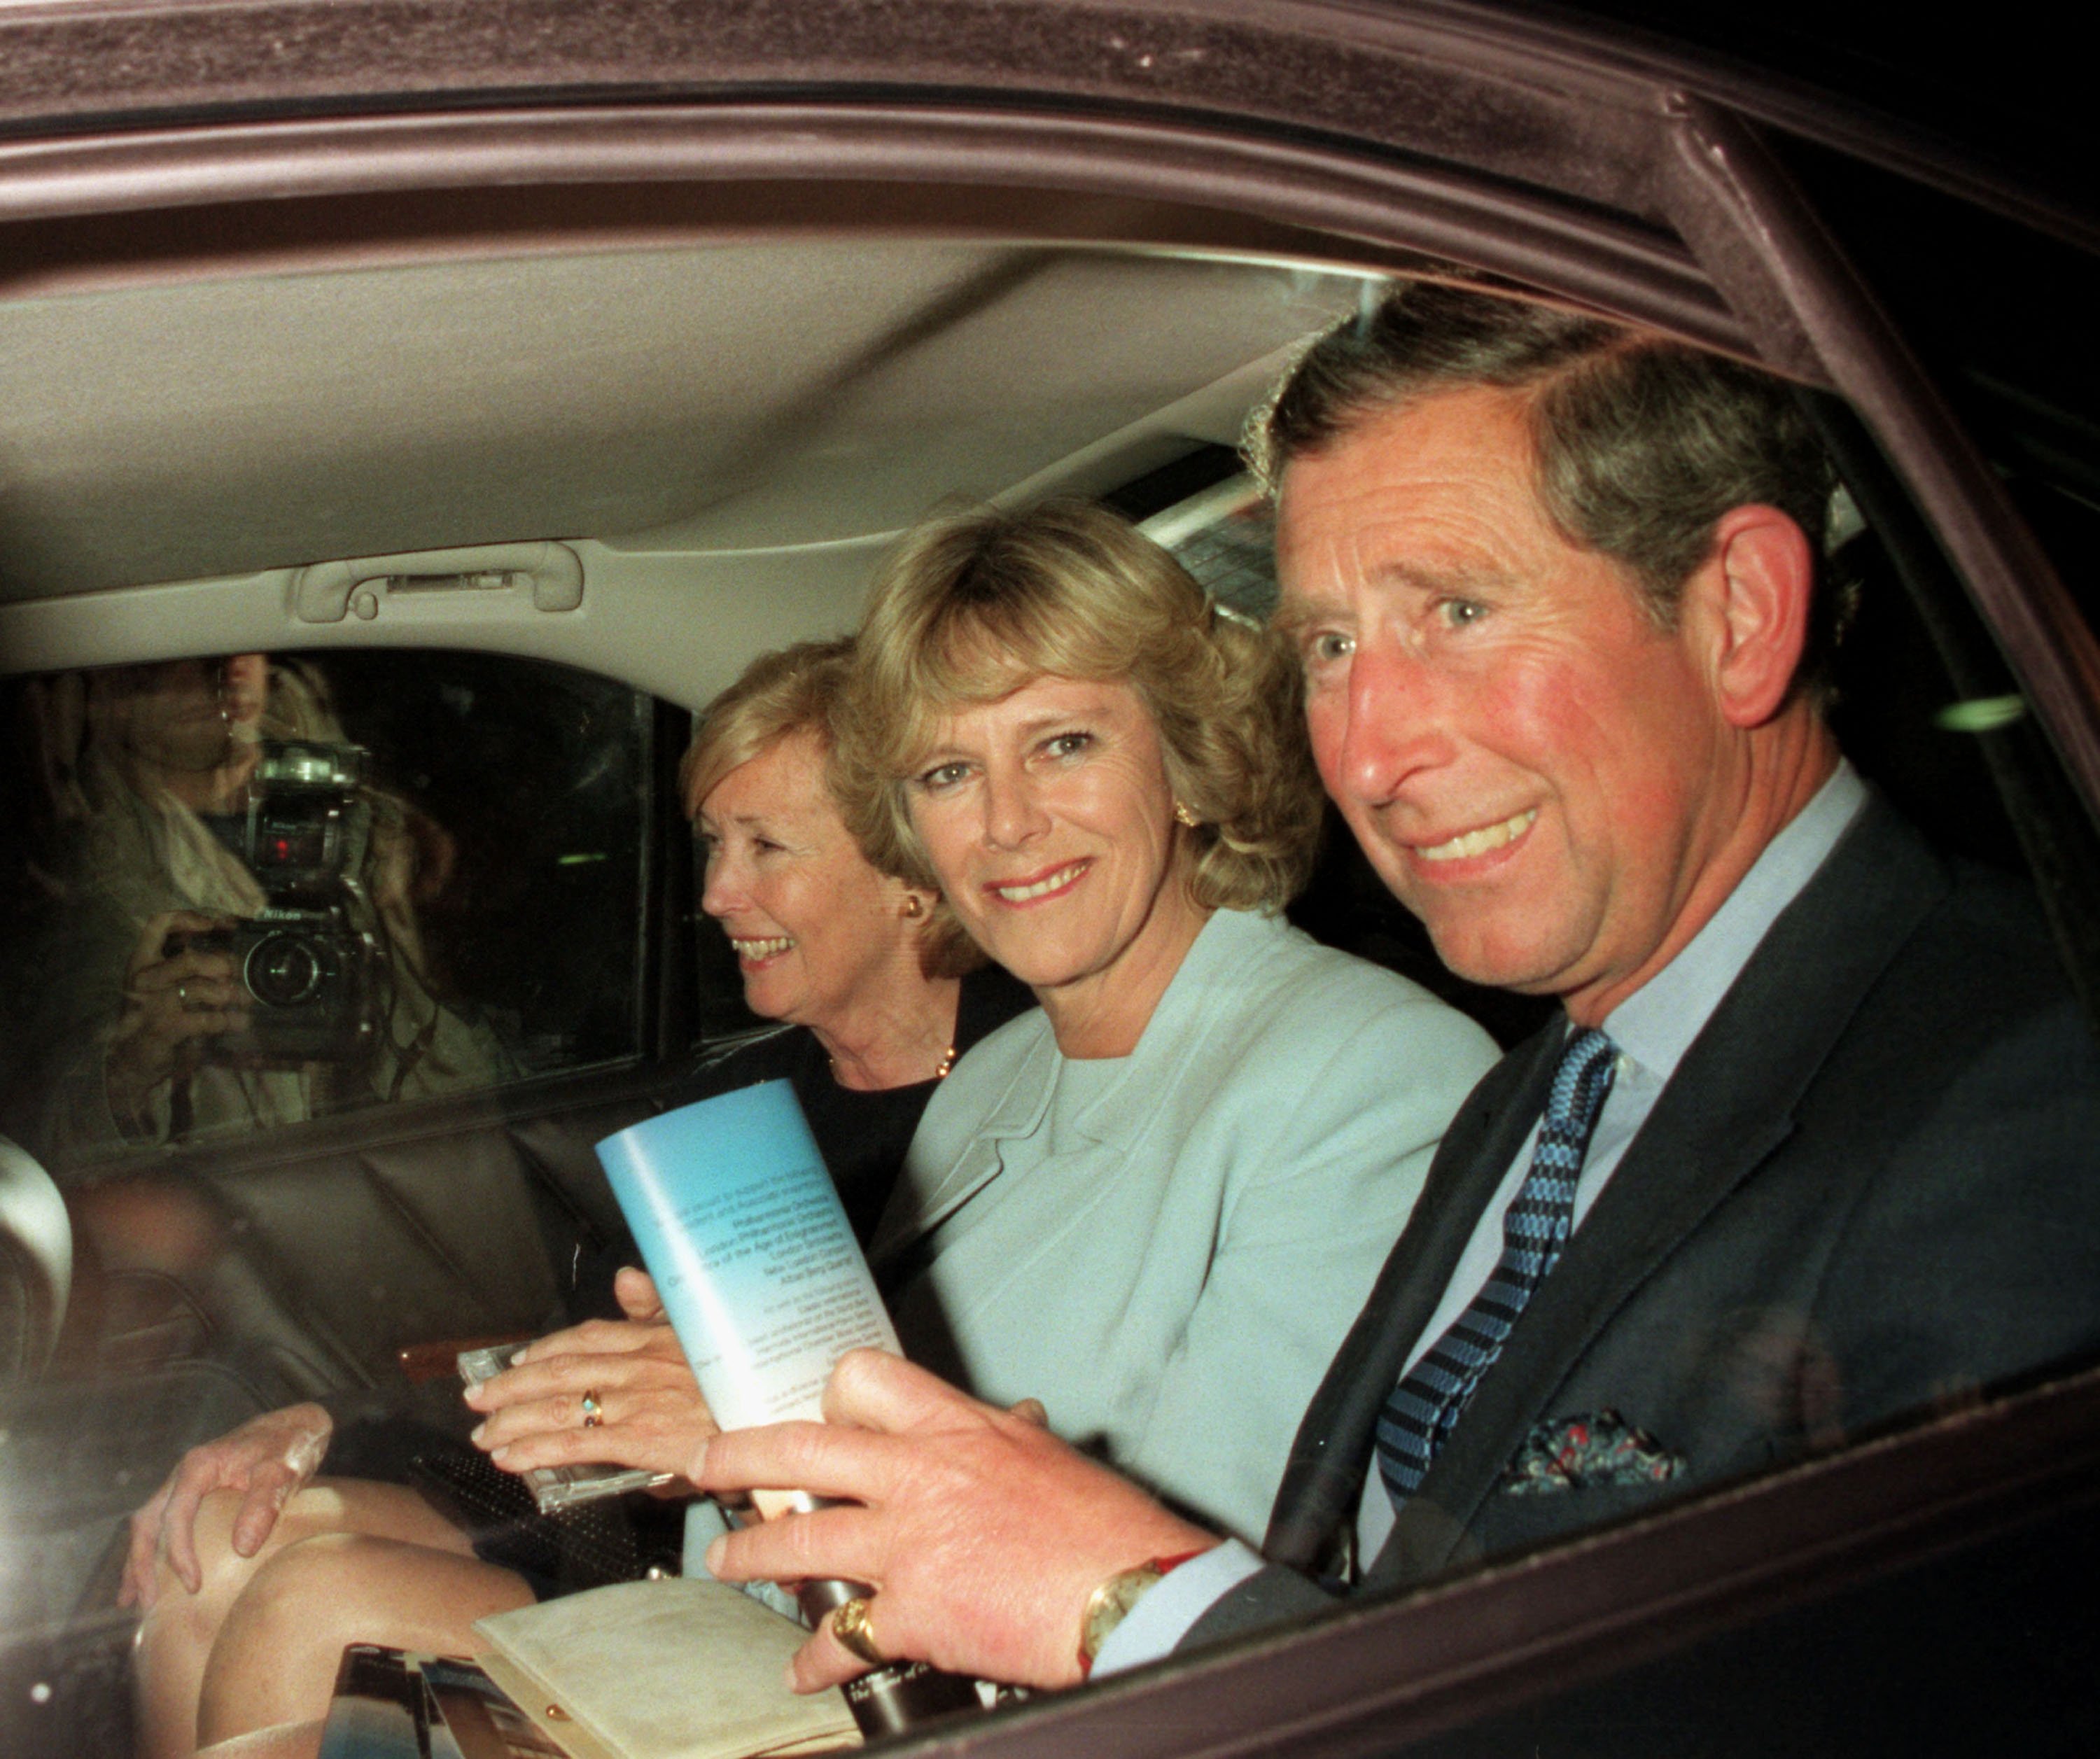 Prince Charles and Camilla Parker-Bowles pictured leaving the Royal Festival Hall on May 6, 1999 in London. / Source: Getty Images